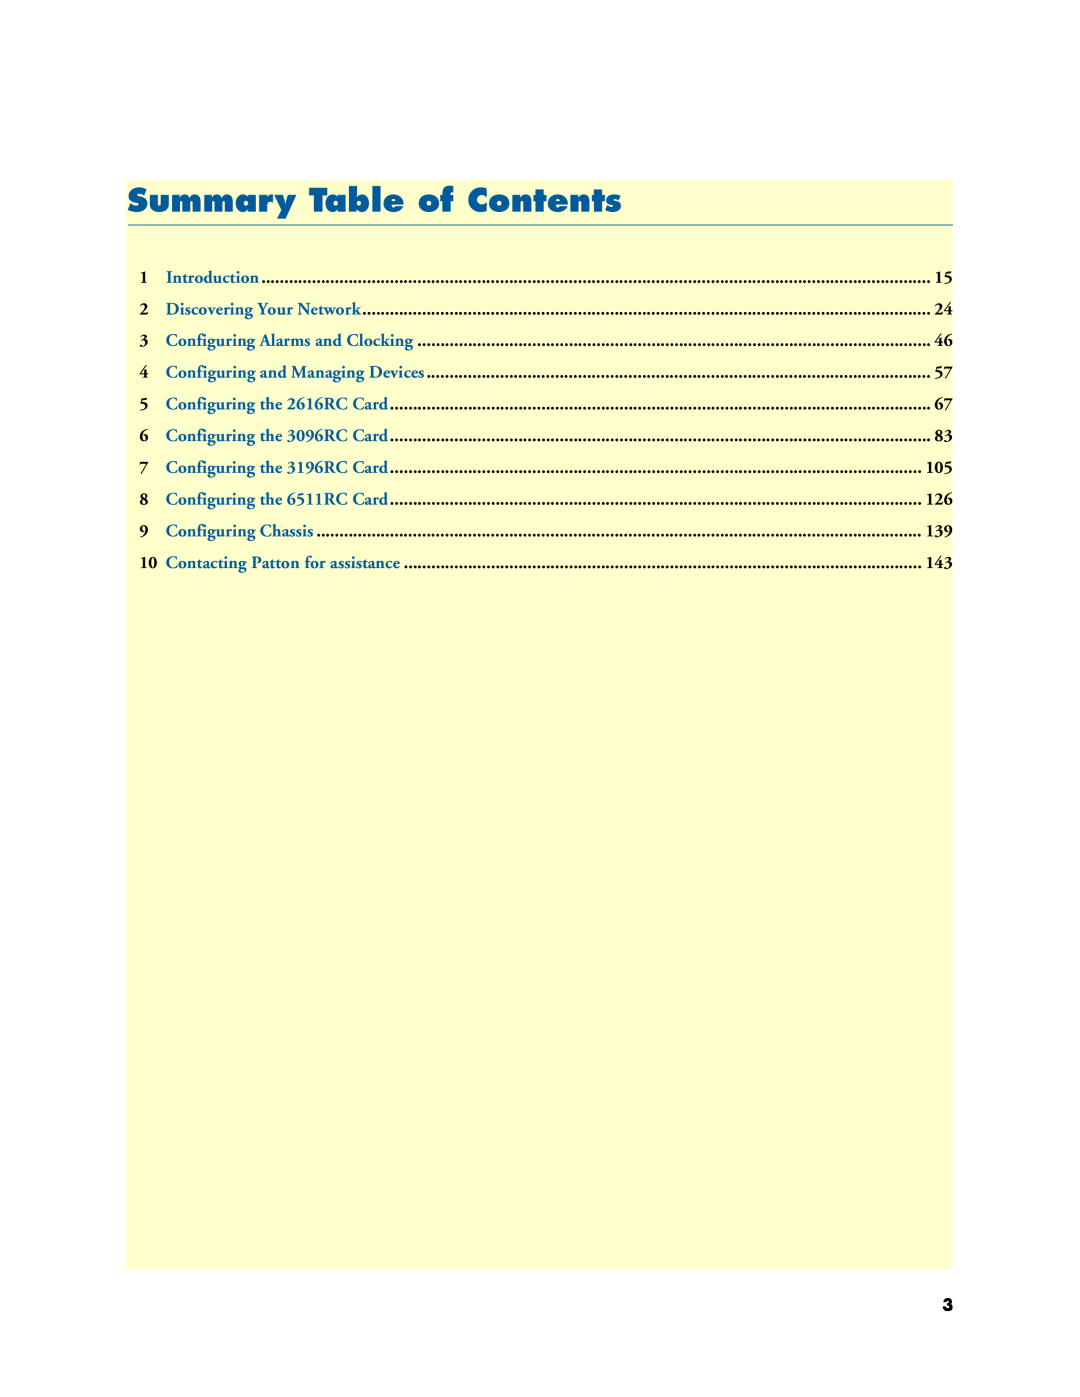 Patton electronic 6300 user manual Summary Table of Contents 